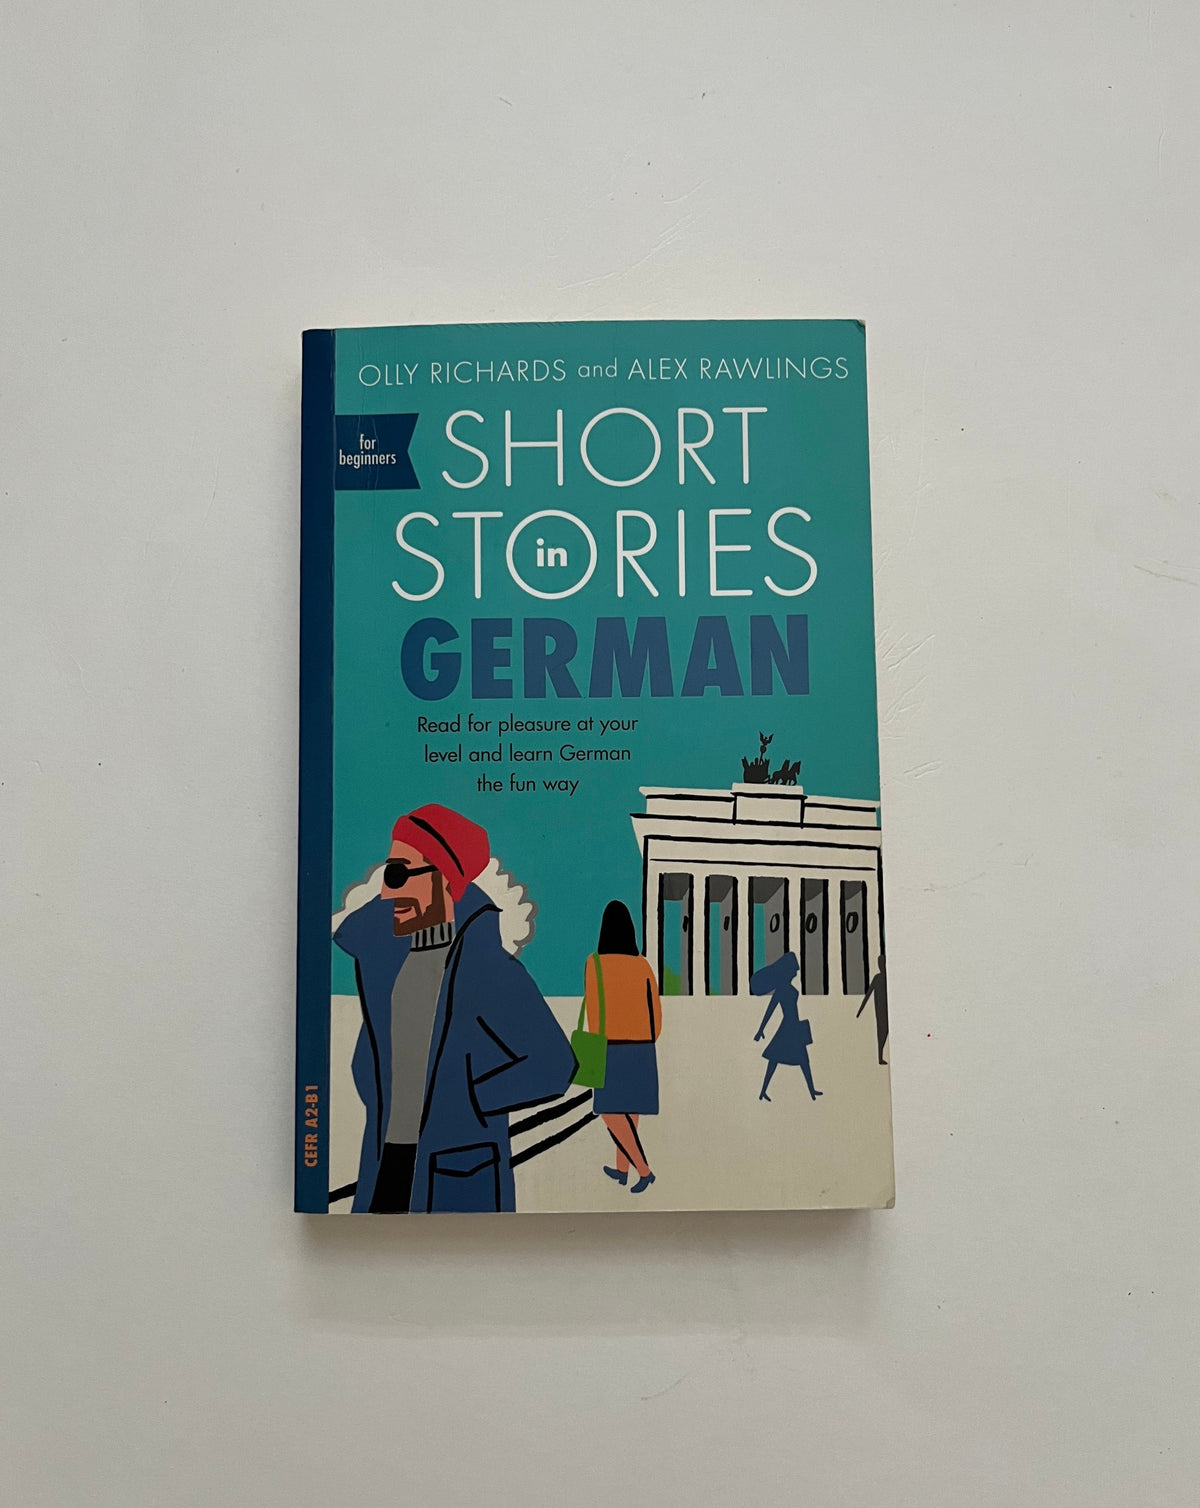 Short Stories in German: For Beginners by Olly Richards